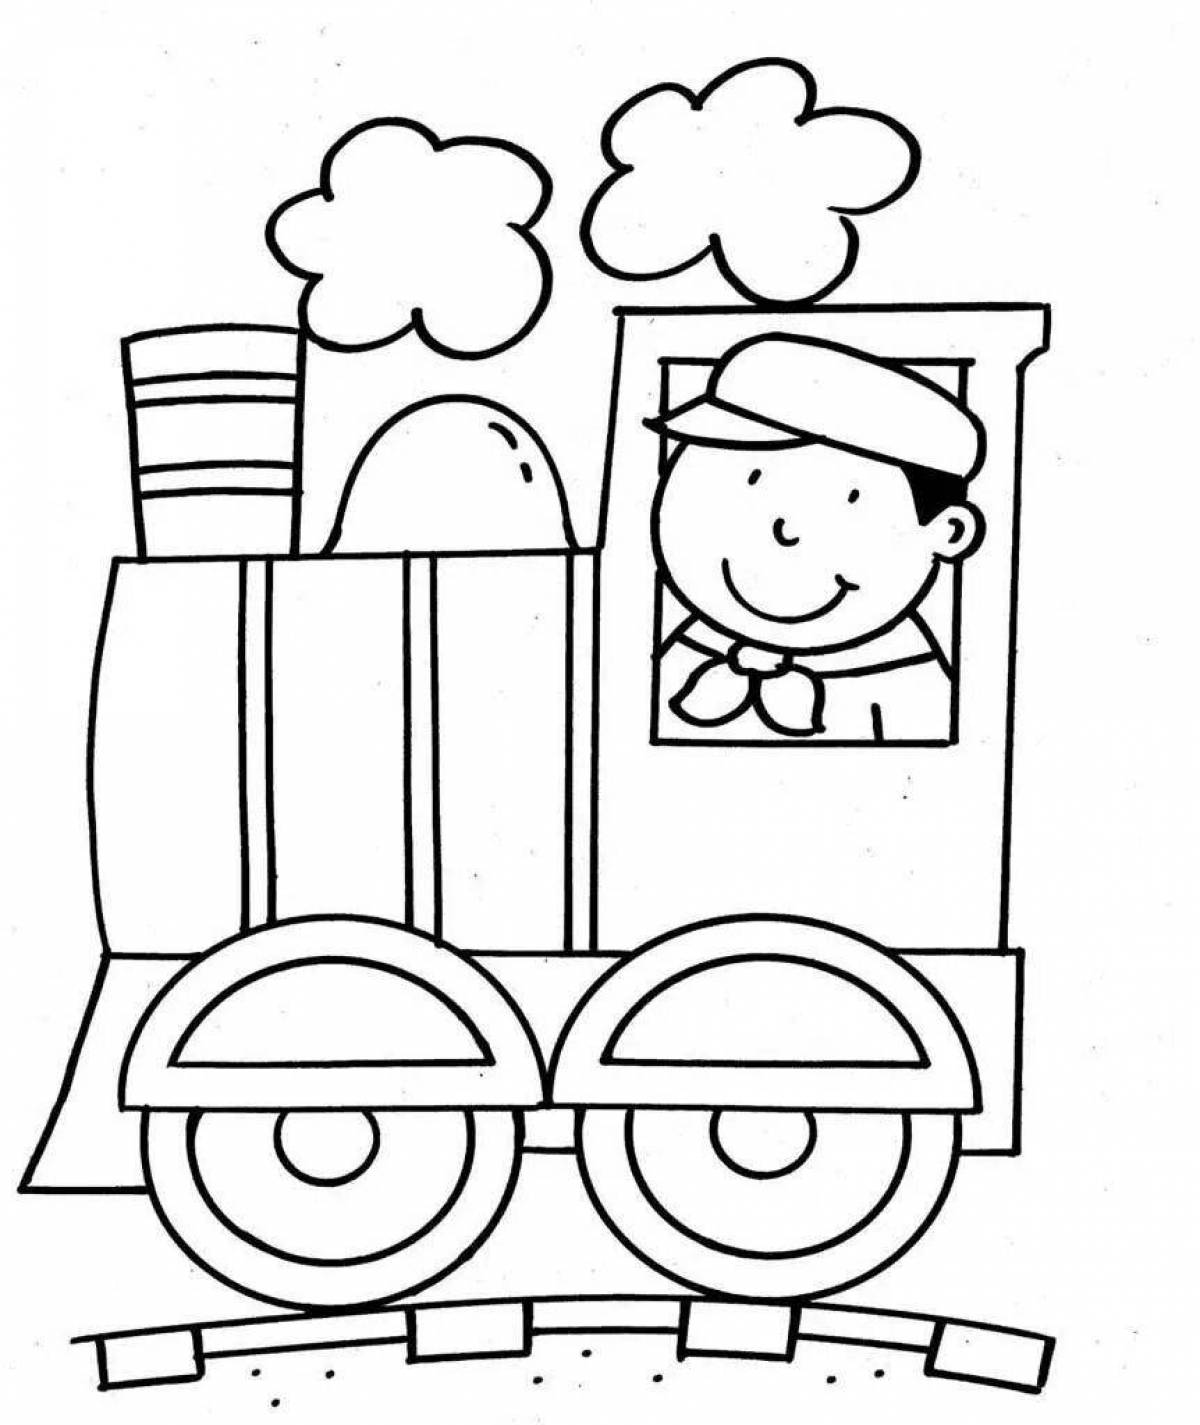 Coloring book nice train for kids